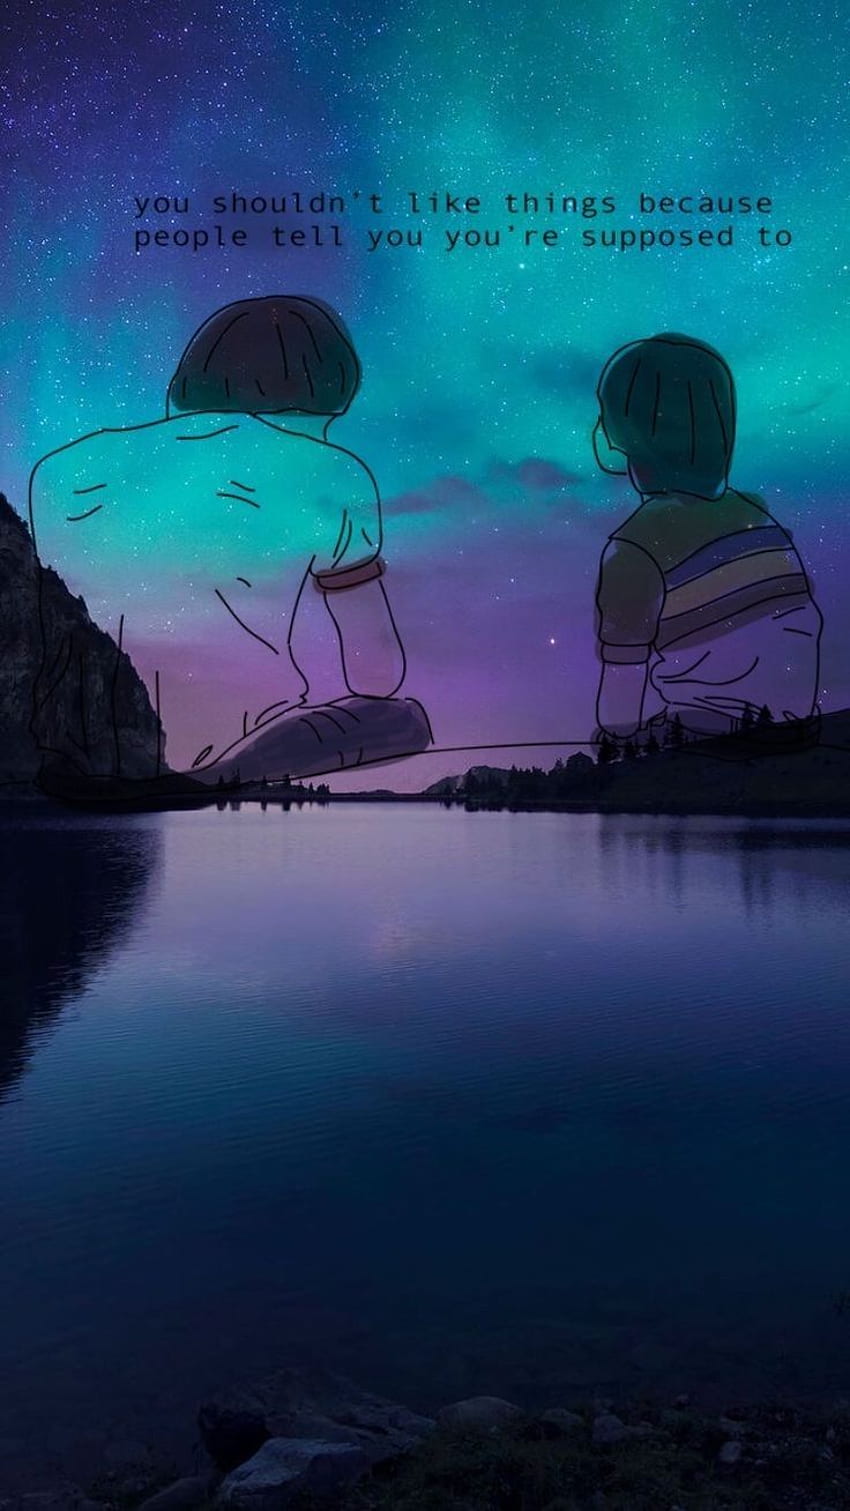 Two people sitting by a lake under the stars with a quote about not liking things because of what other people say. - Indigo, Stranger Things